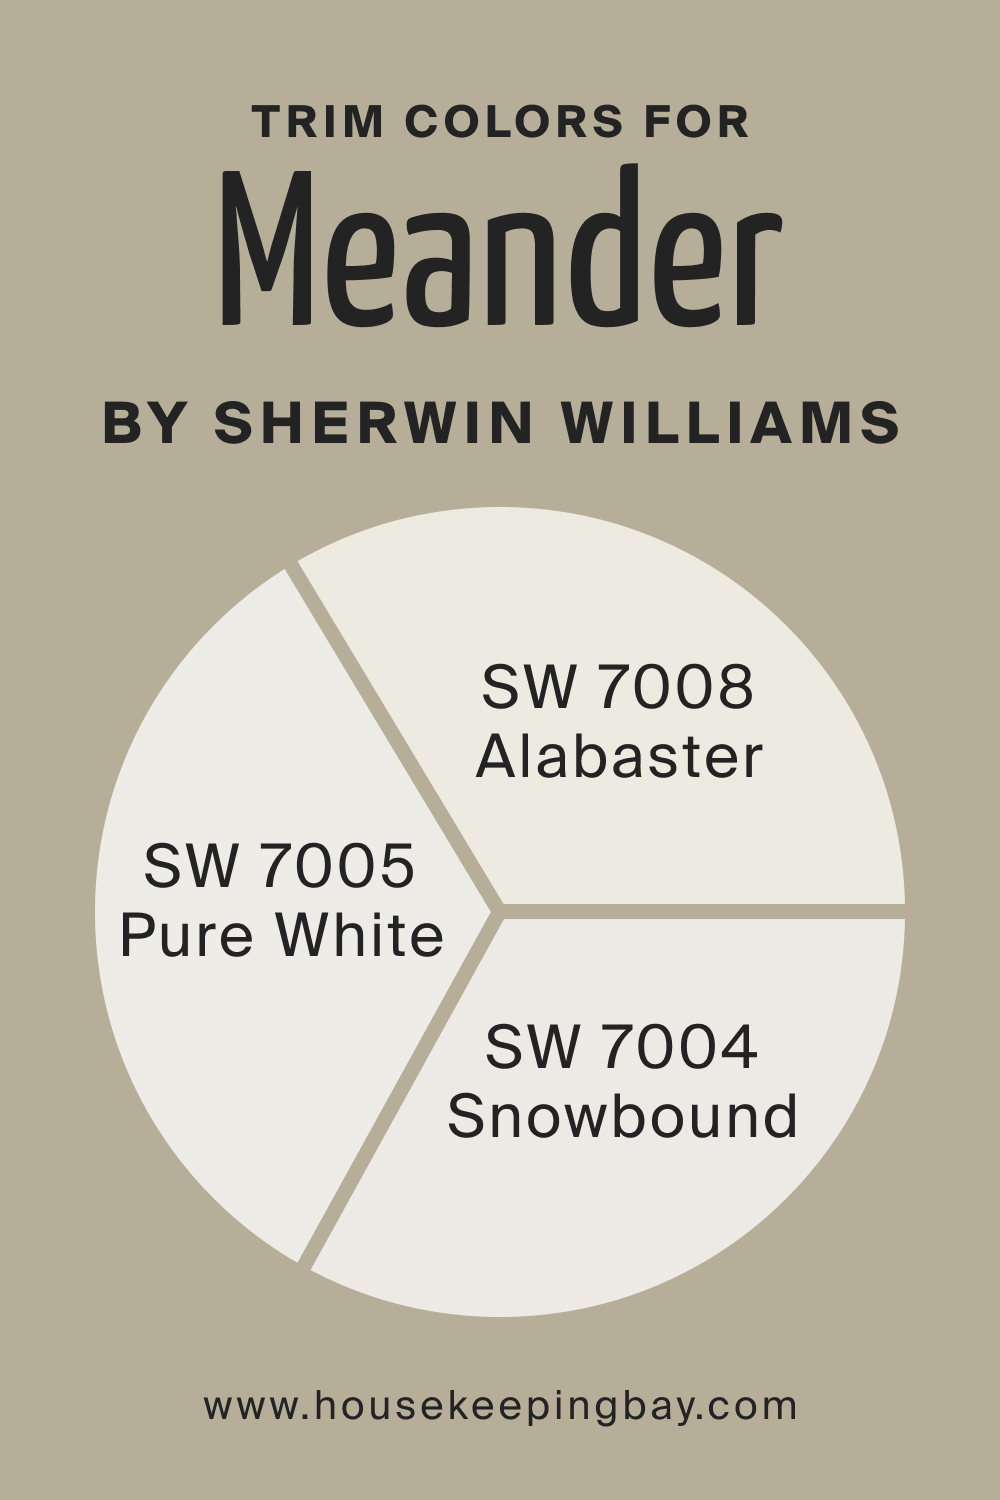 Trim Colors of SW 9522 Meander by Sherwin Williams